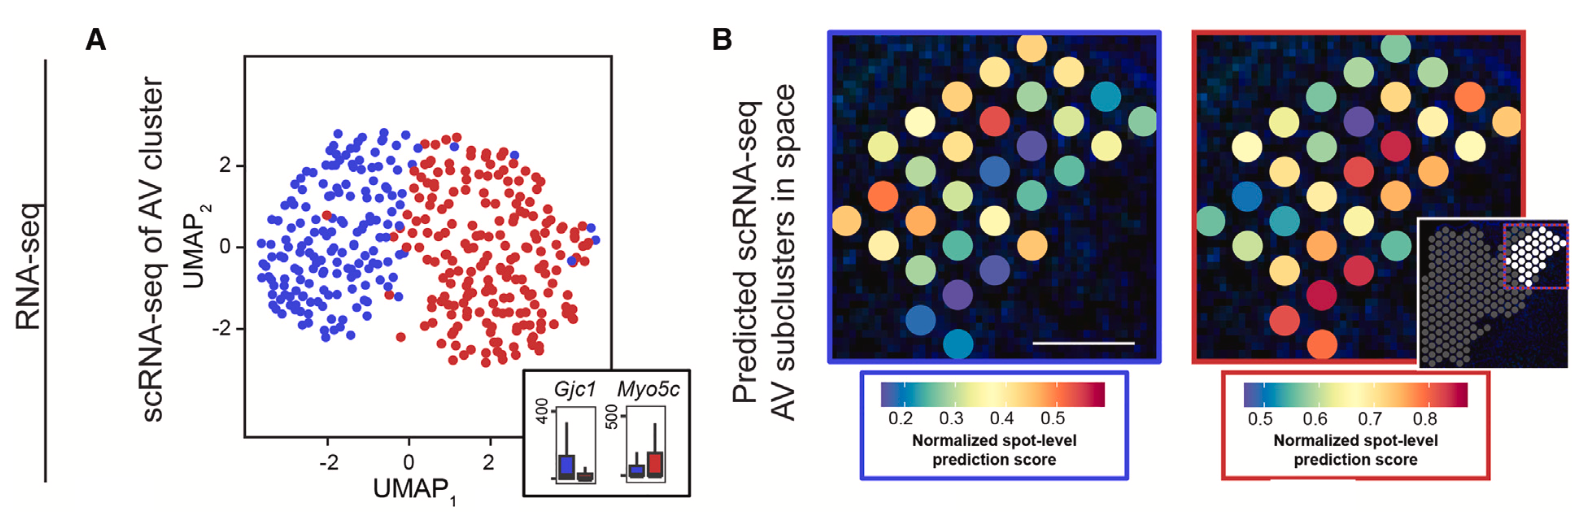 Figure 5. Spatially graded multimodal heterogeneity within the AV. (A) UMAP and subclusters for the scRNA-seq AV cluster. (B) Visium ST-based spatial location predictions of scRNA-seq AV subclusters from (A). Inset at right illustrates location of highlighted AV within the broader thalamus, with white spots corresponding to AV cluster from ST. Image adapted from Figure 5 from Kapustina et al. 2024. (CC BY 4.0).